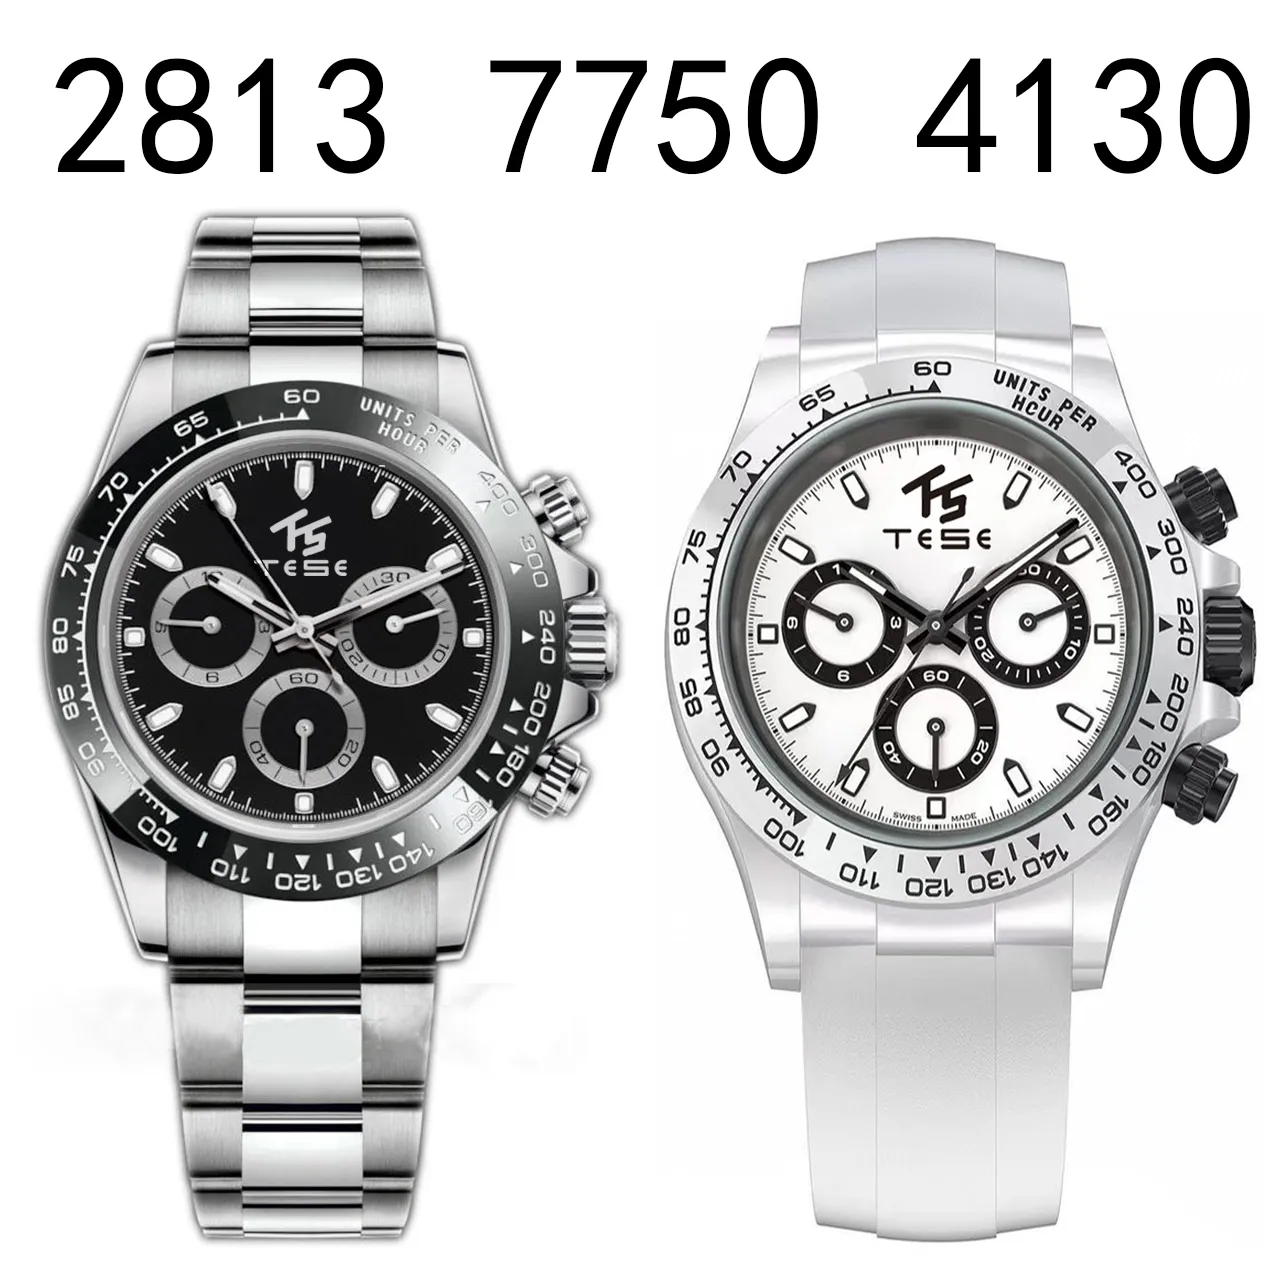 BT Clean NF VR JF Luxury Sport Watch Men and Women Timing 2813 ETA 7750 4130 Mekanisk automatisk neutral 40 mm All White Ceramic Rubber Watch Panda Ditongna Diving 904L